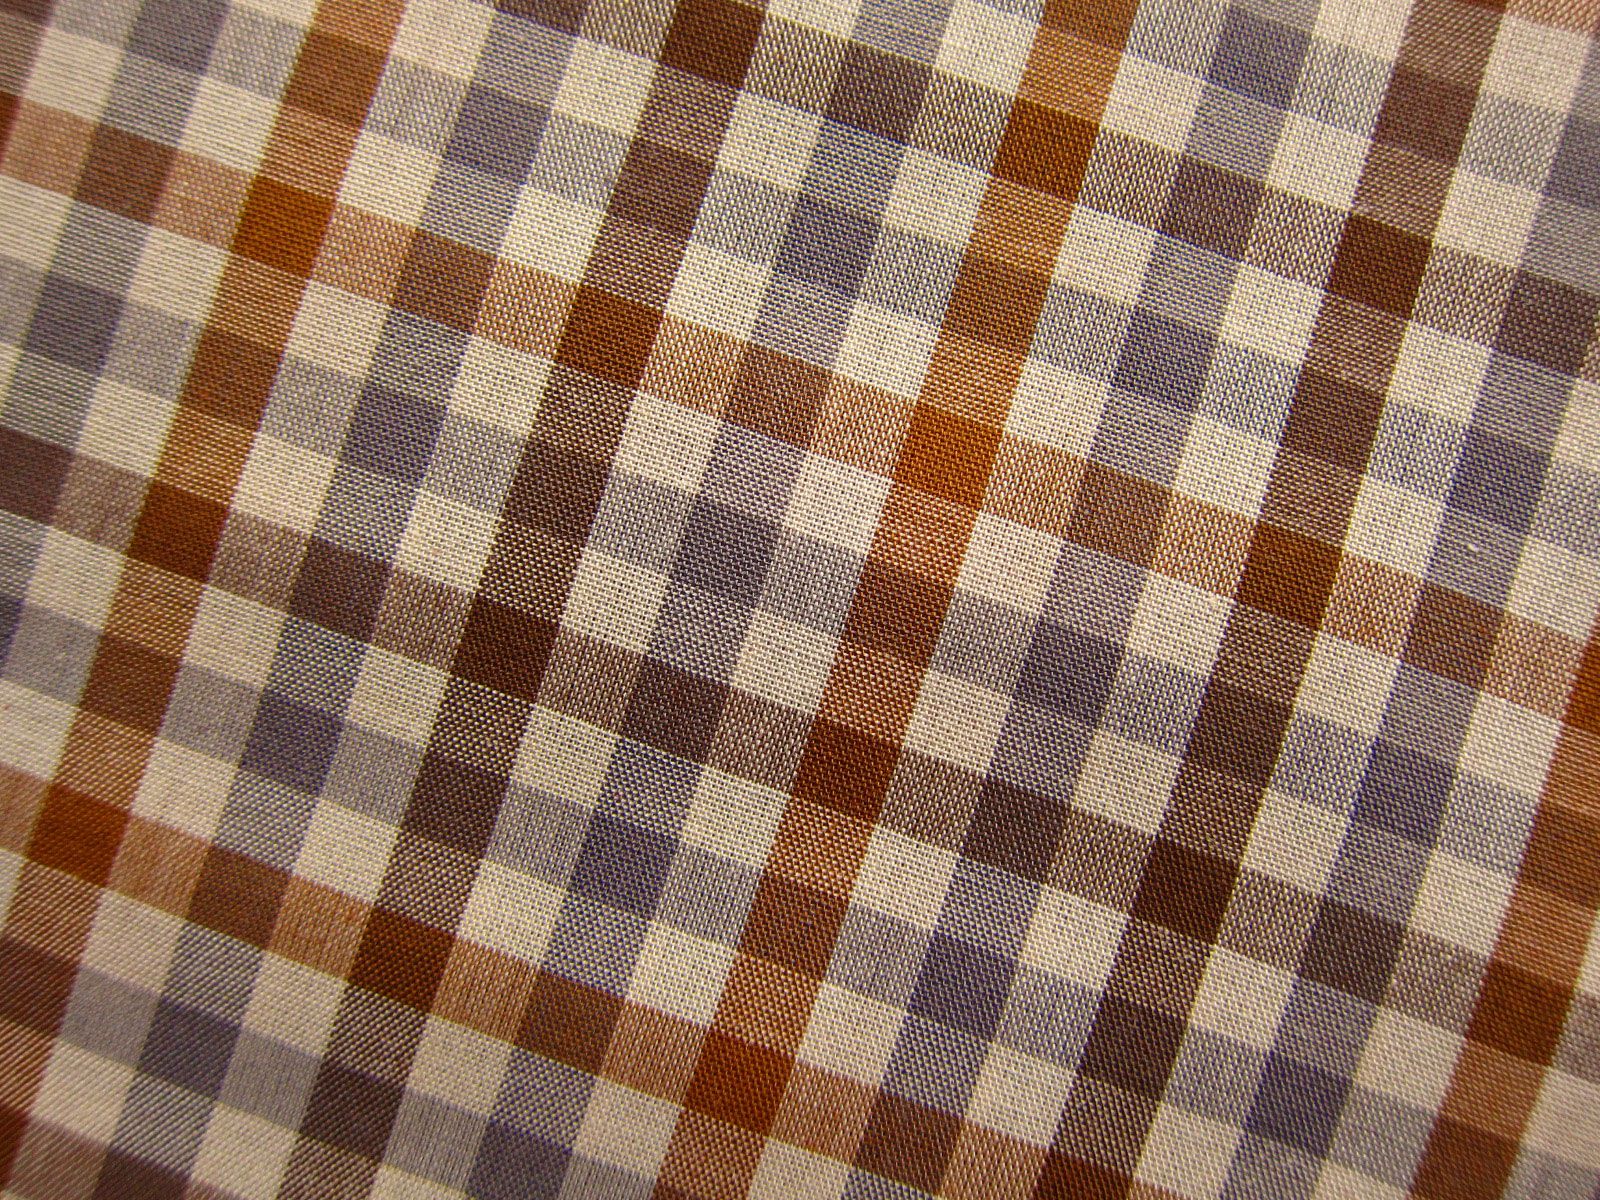 Flannel Iphone Wallpapers